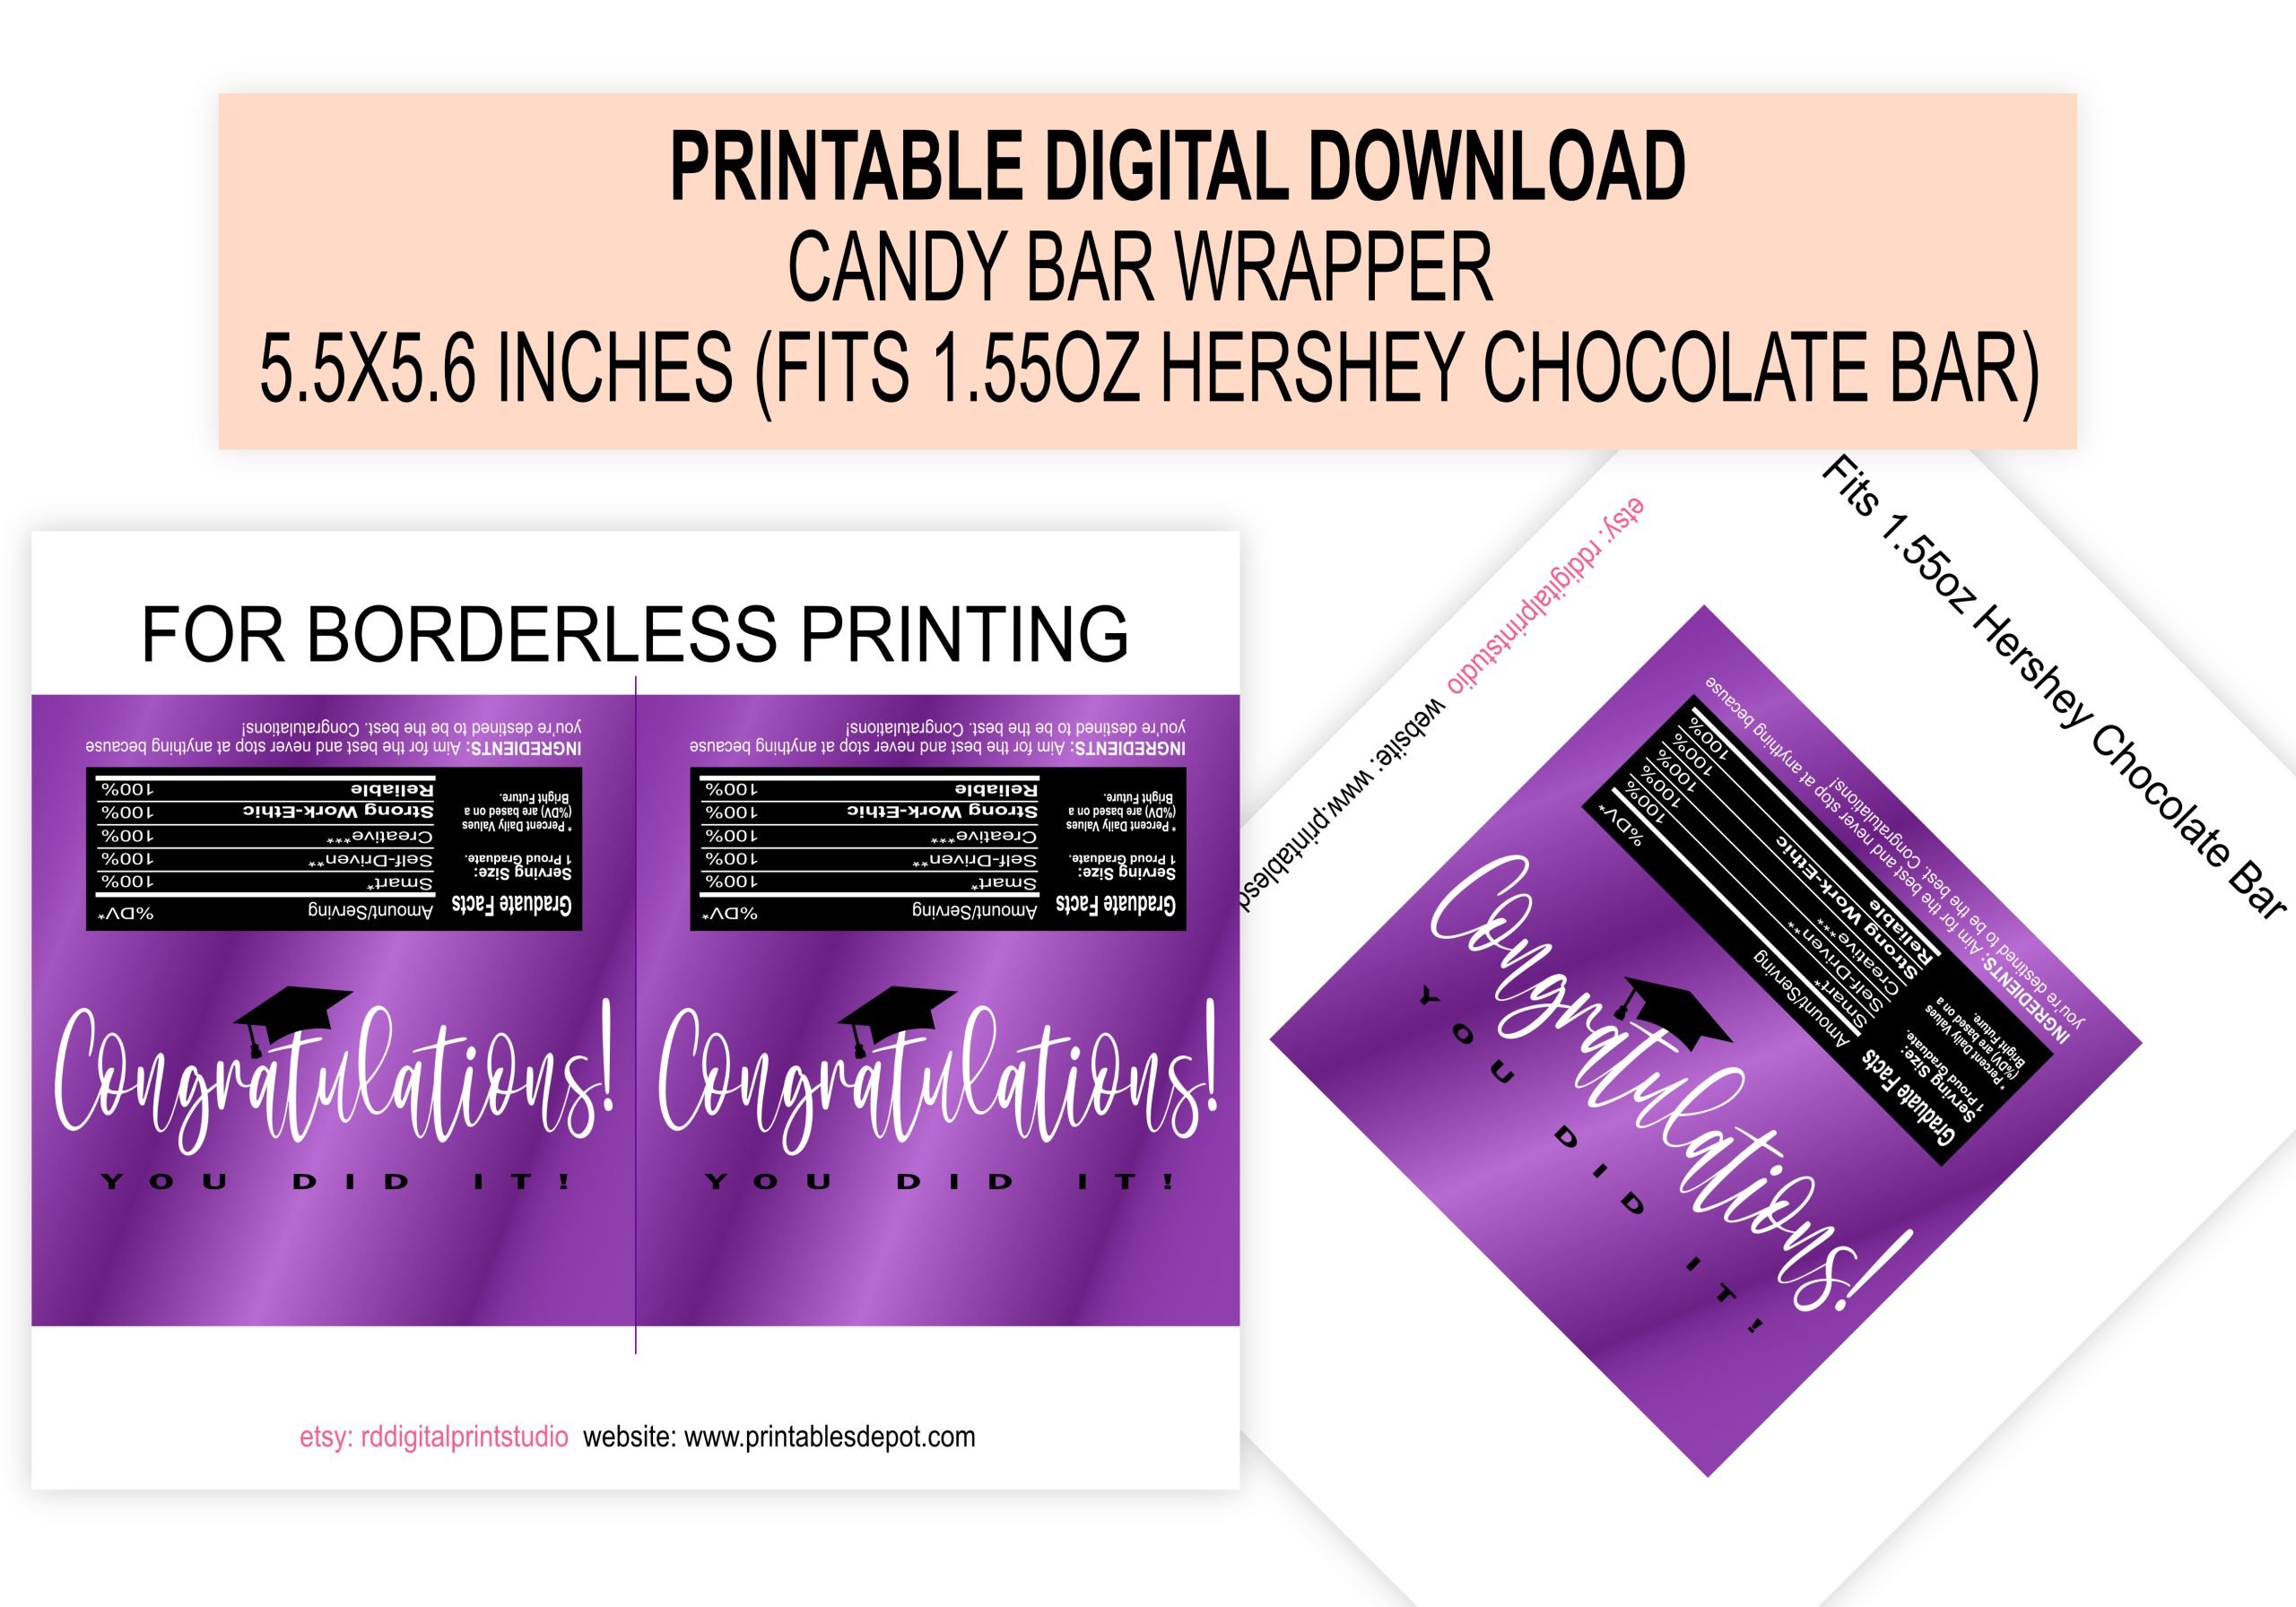 Candy Bar Wrapper Printable Graduation Day Candy Bar Wrapper – Purple Black Graduation Day Chocolate Bar Wrapper 8.5x11 Printable Wrapper